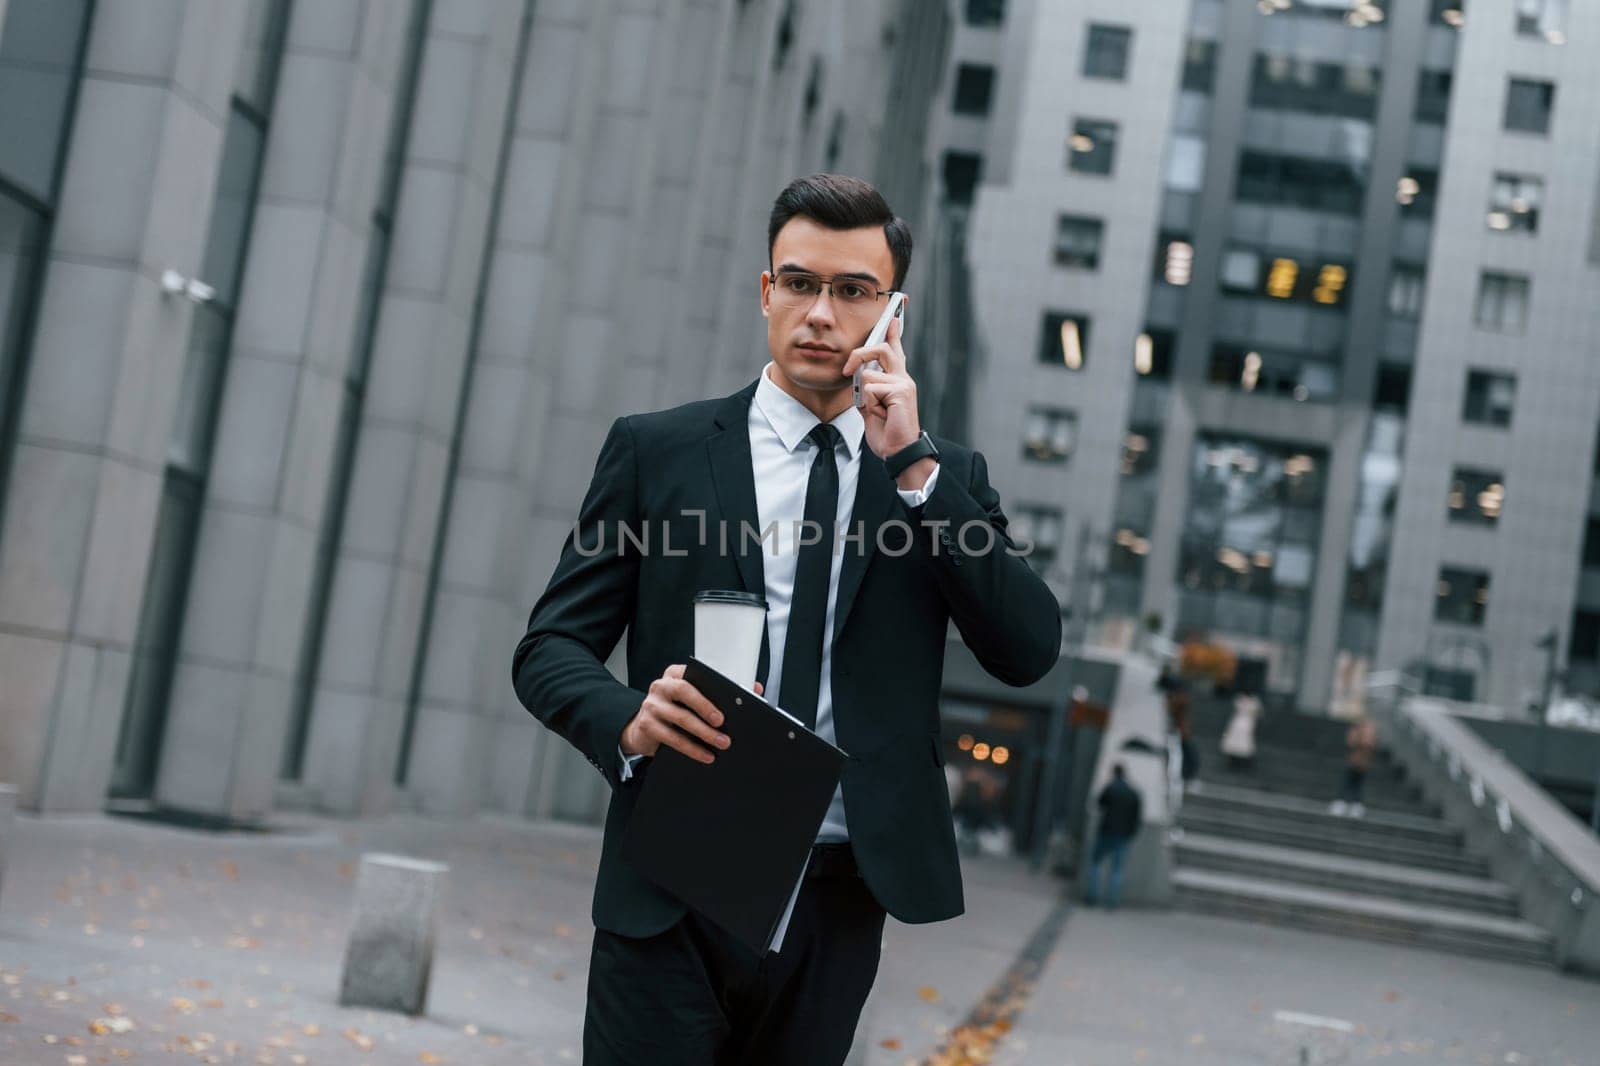 Walking and talking by phone. Businessman in black suit and tie is outdoors in the city by Standret